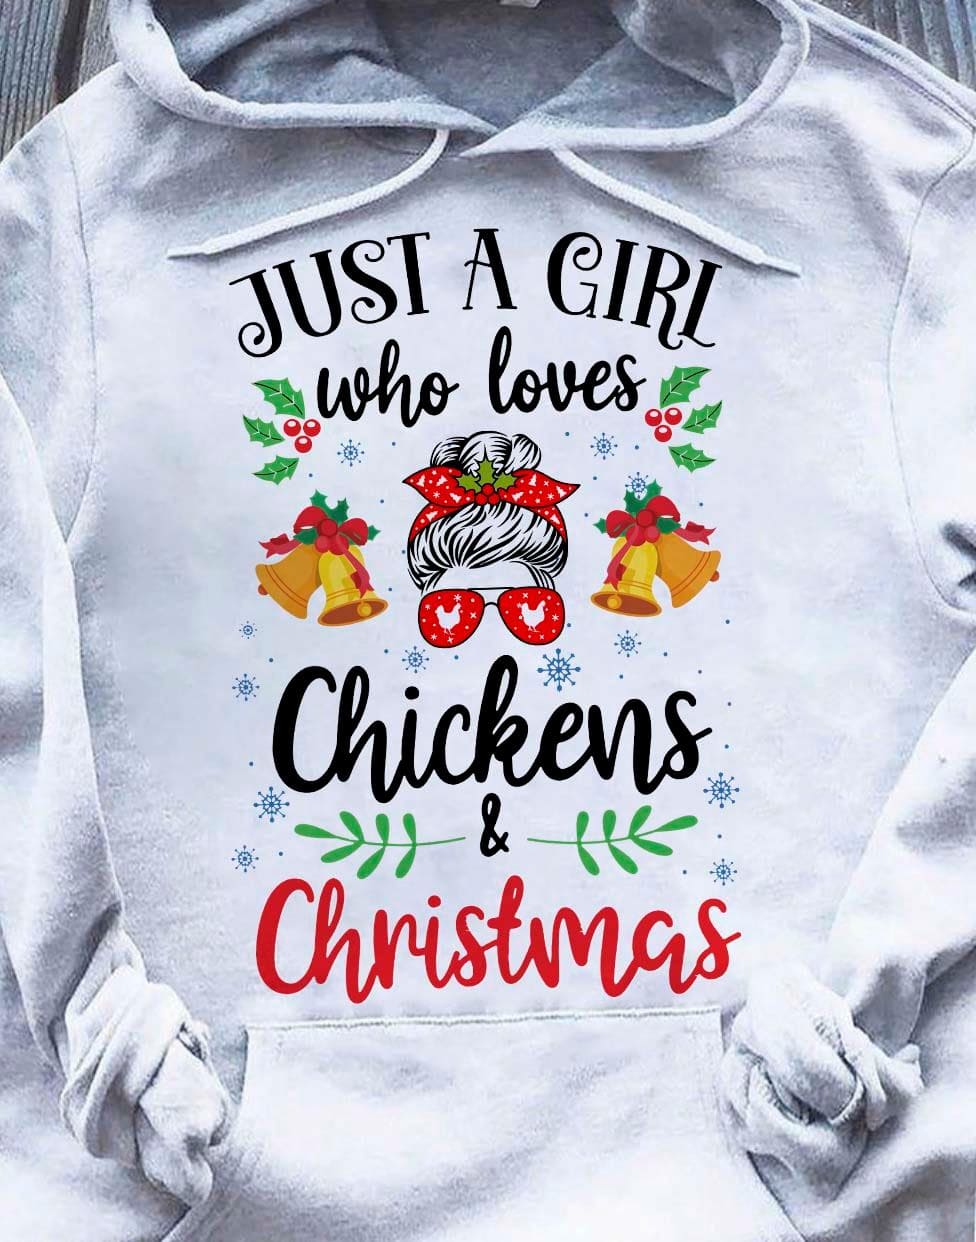 Just a girl who loves chikens and christmas - Christmas ugly sweater, girl loves chickens